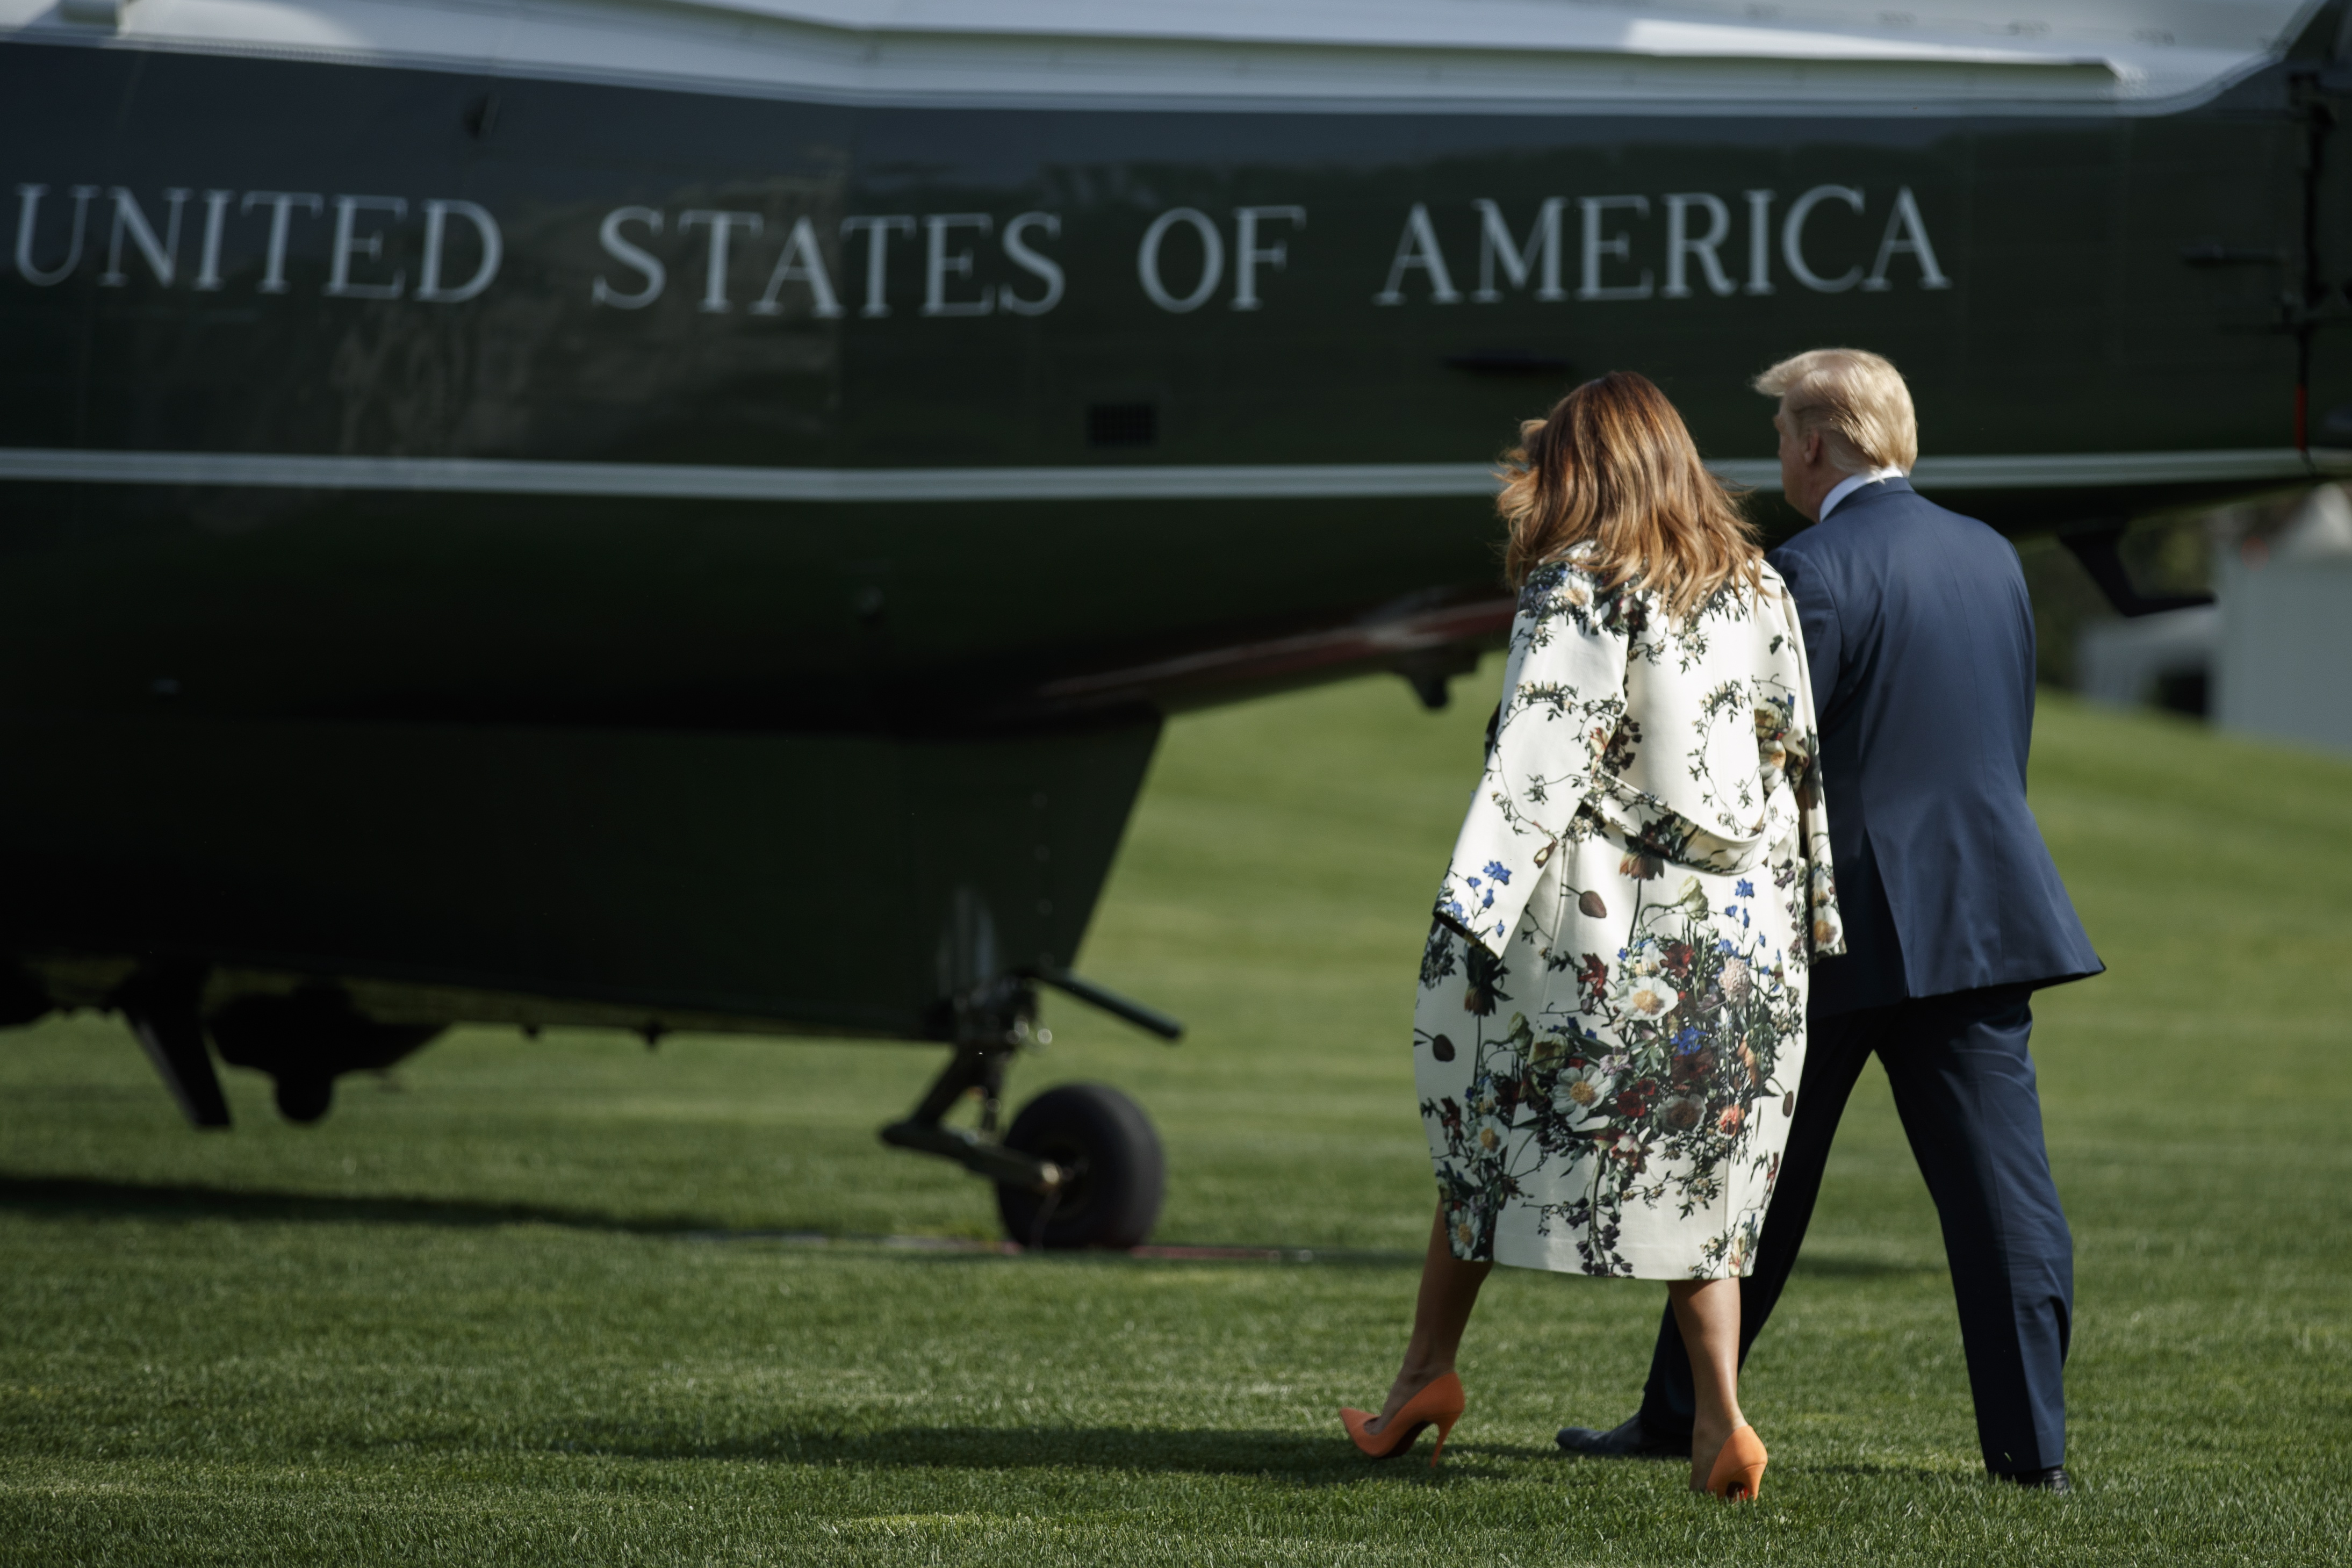 epa07514859 US President Donald J. Trump and First Lady Melania Trump walk to board Marine One one without taking questions from the news media on the South Lawn of the White House in Washington, DC, USA, 18 April 2019. The Mueller report, released today, states the special counsel's office found no evidence of collusion with the Russian government, but does not state a conclusion about obstruction of justice.  EPA/SHAWN THEW